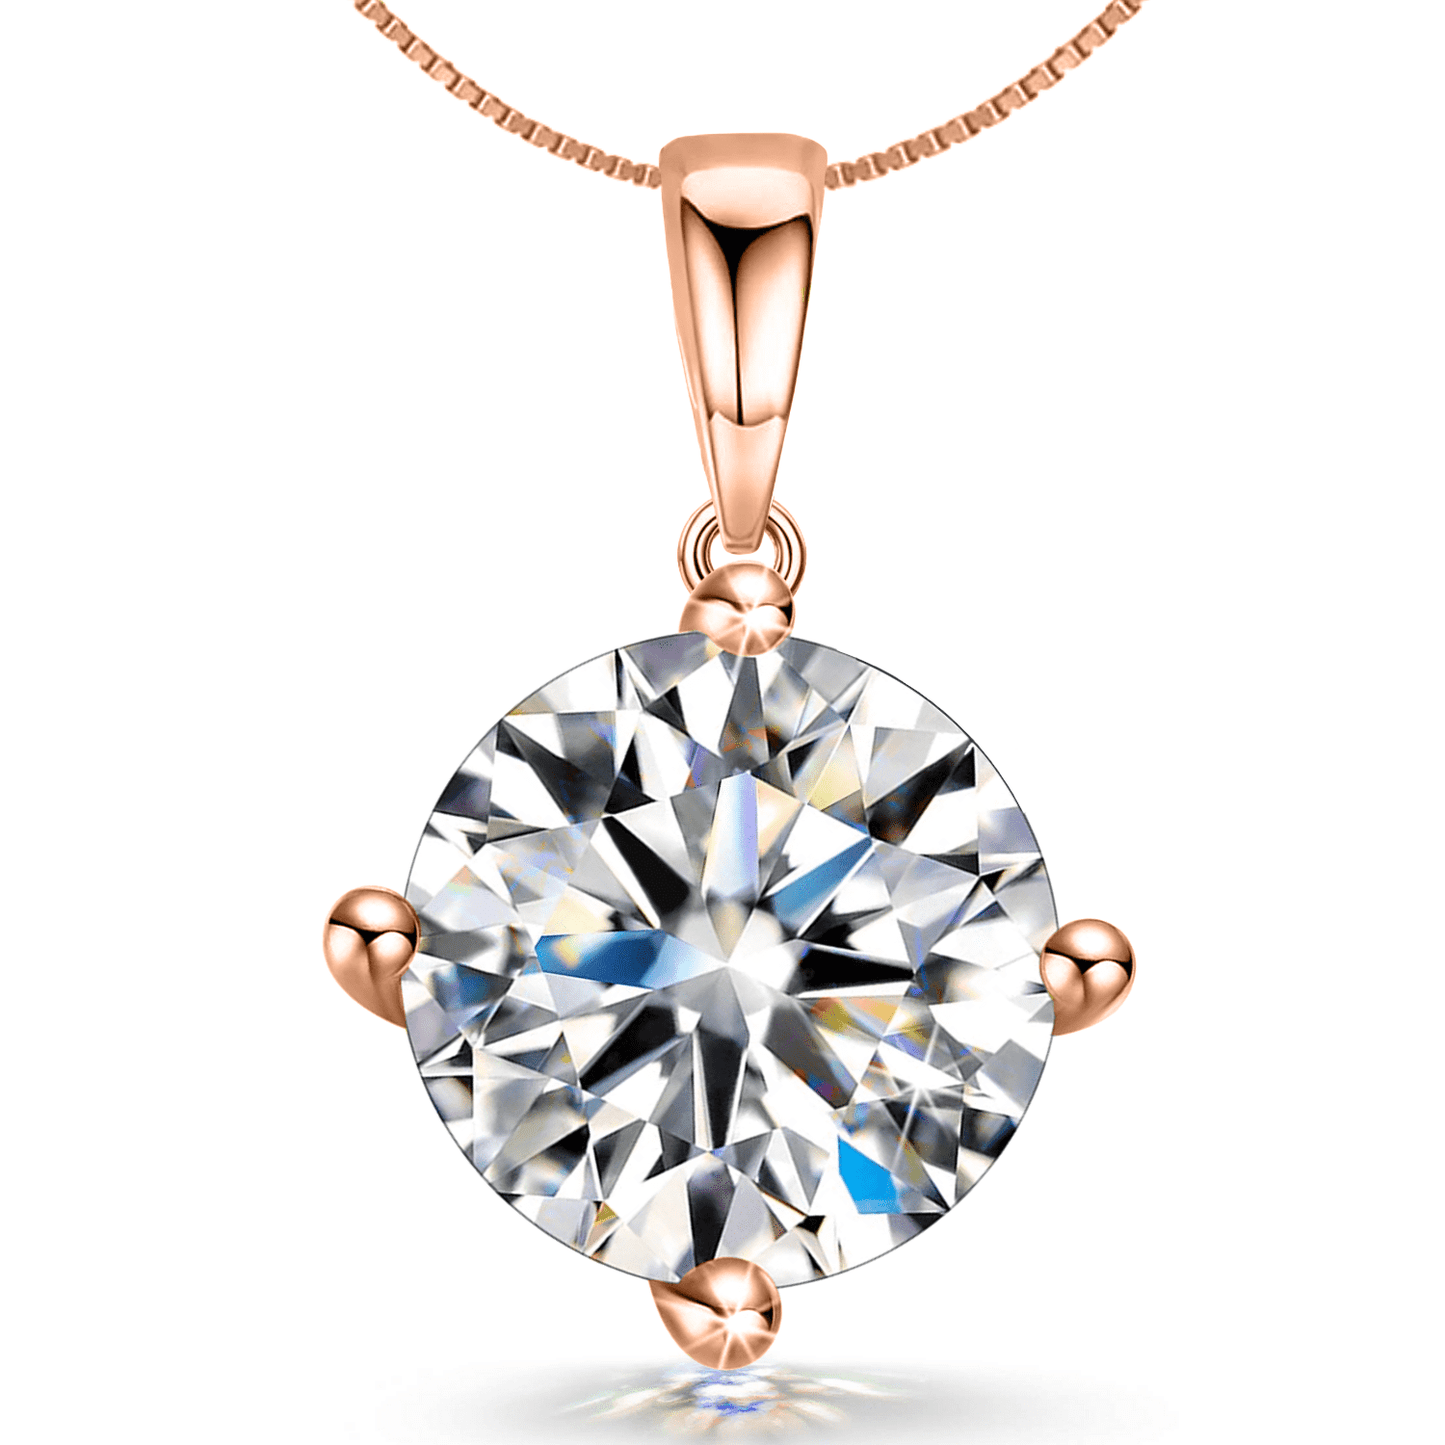 Rose Gold Solitaire Pendant with Chain in 92.5 Silver embellished with Swarovski Zirconia - 18K Rose Gold Finish